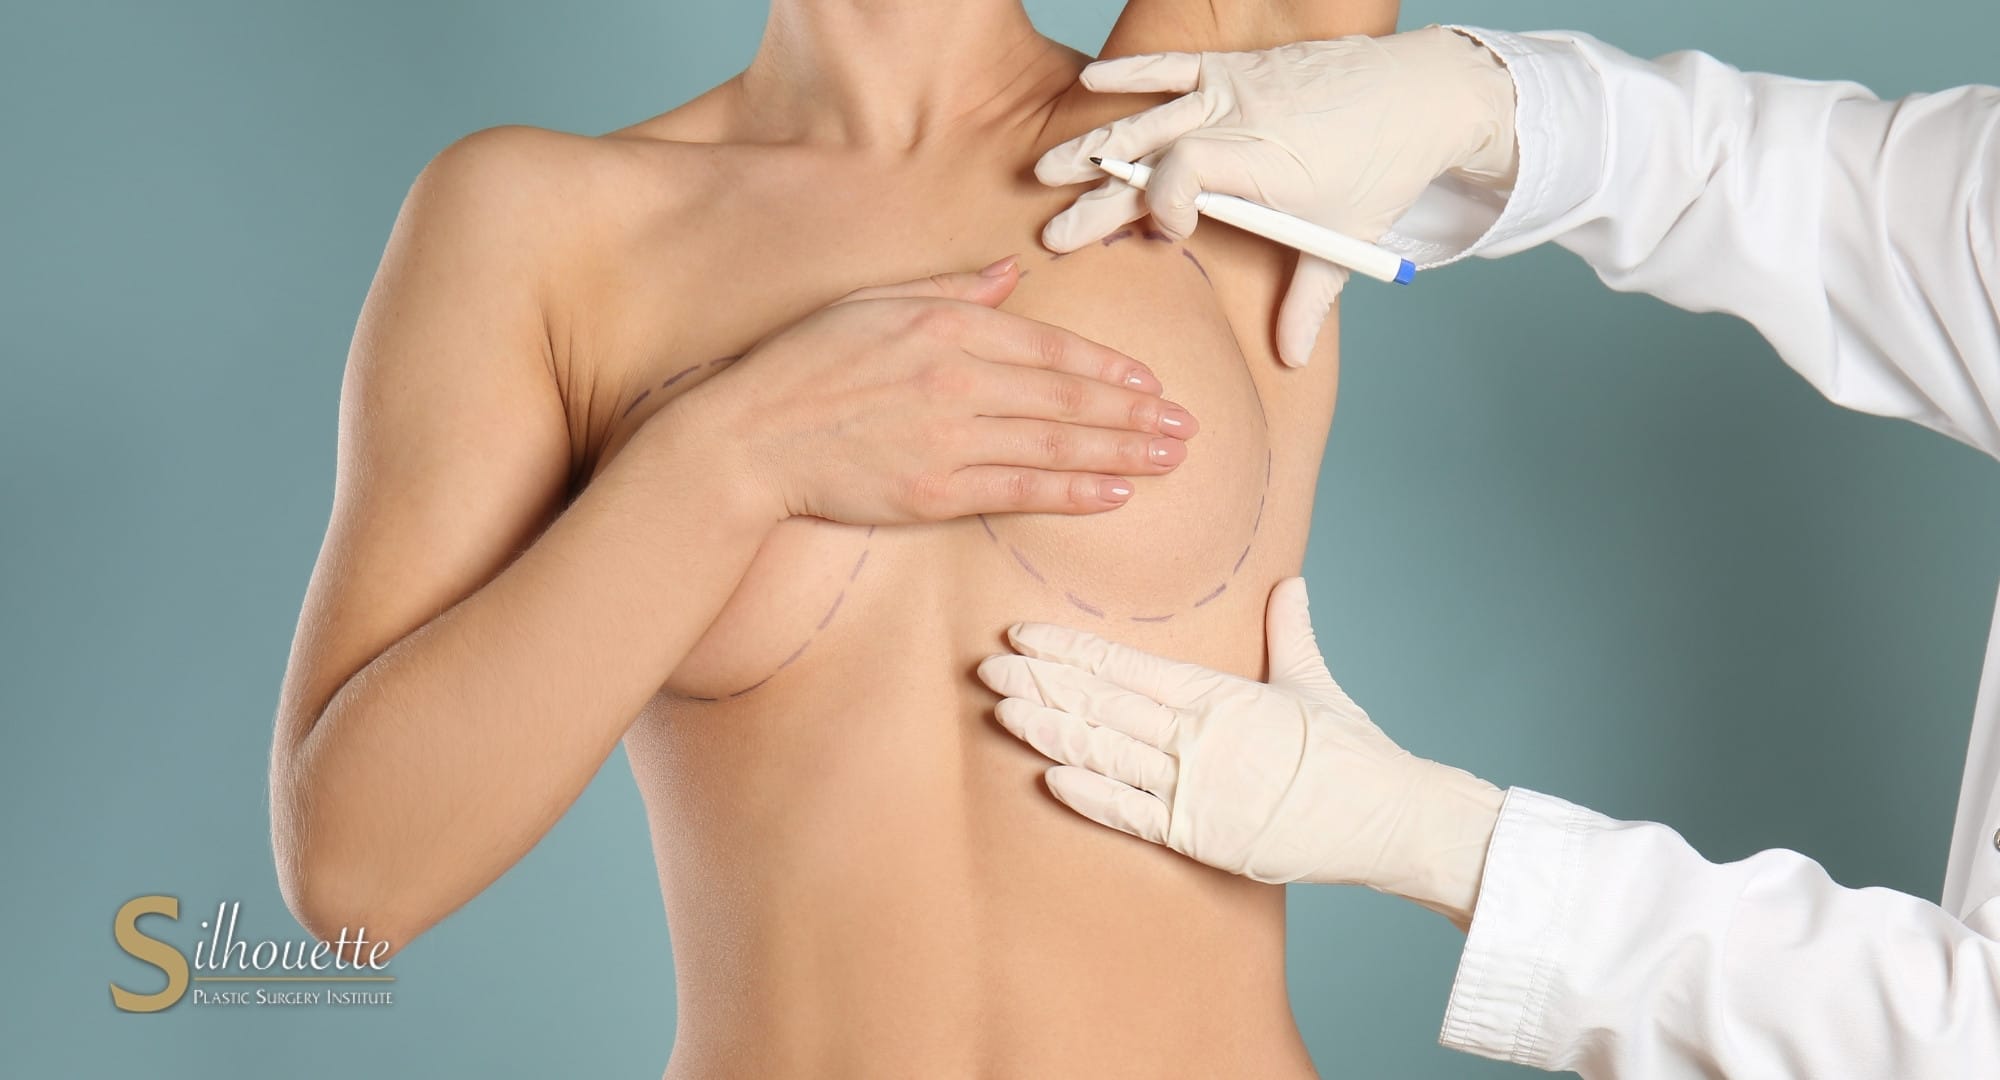 Is Breast Lift and Breast Reduction Covered by Insurance?